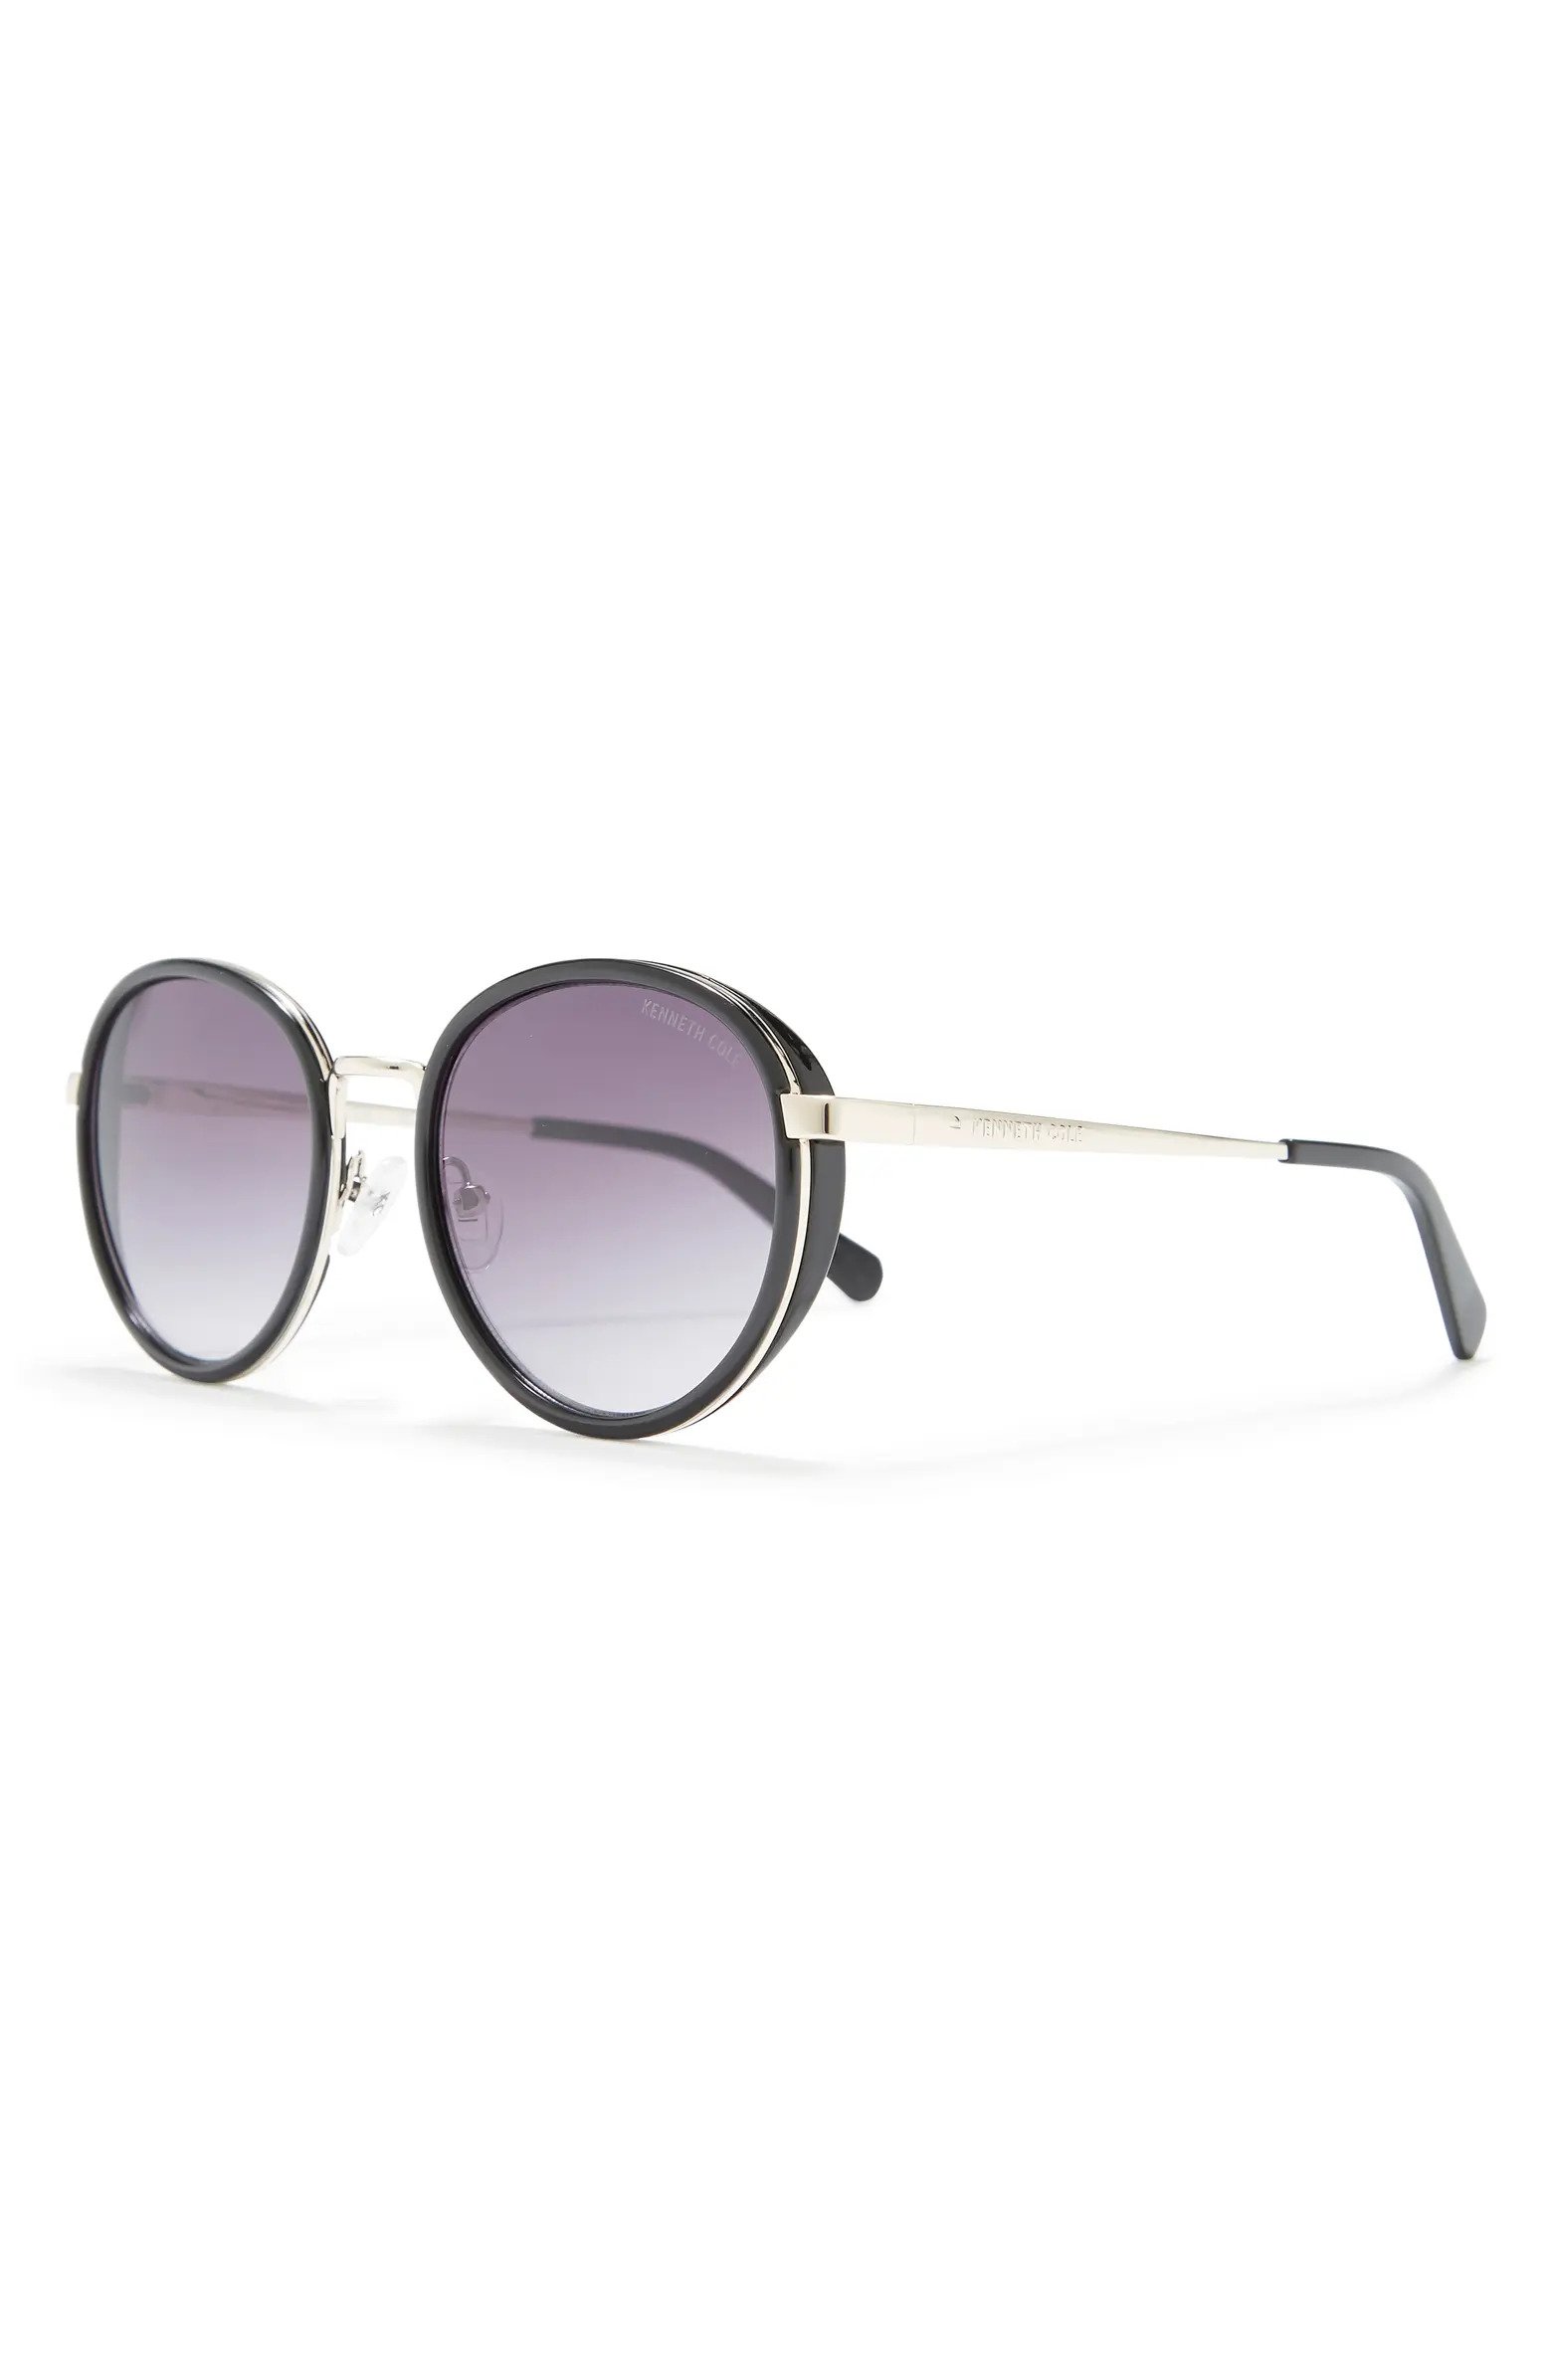 Kenneth Cole Round Sunglasses